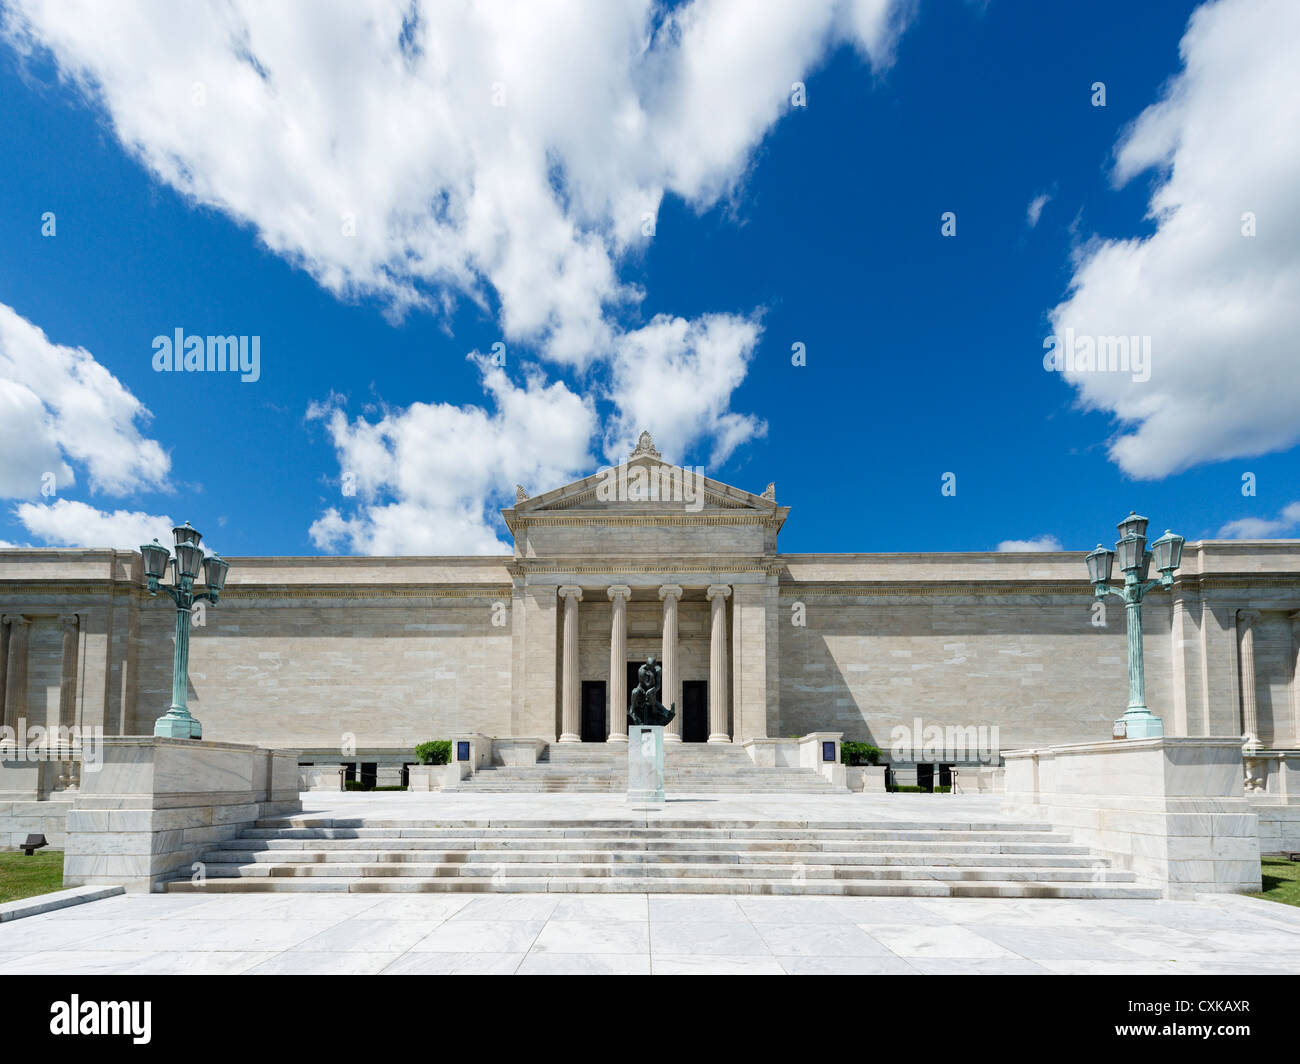 Southern facade of the Cleveland Museum of Art, University Circle district, Ohio, USA Stock Photo